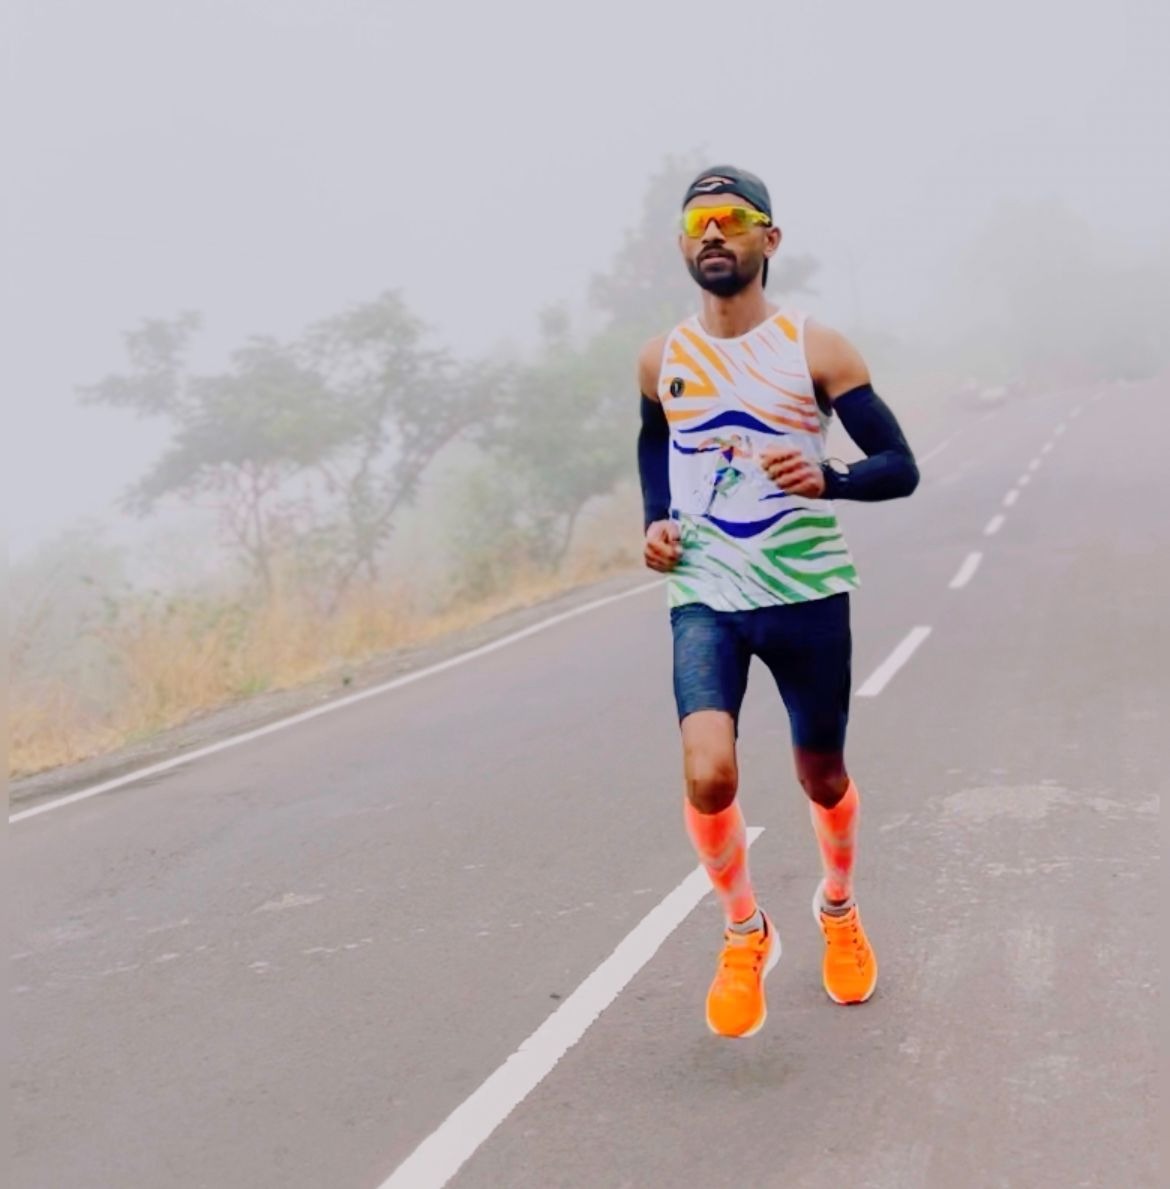 Son of Kolhapur will run in South Africa